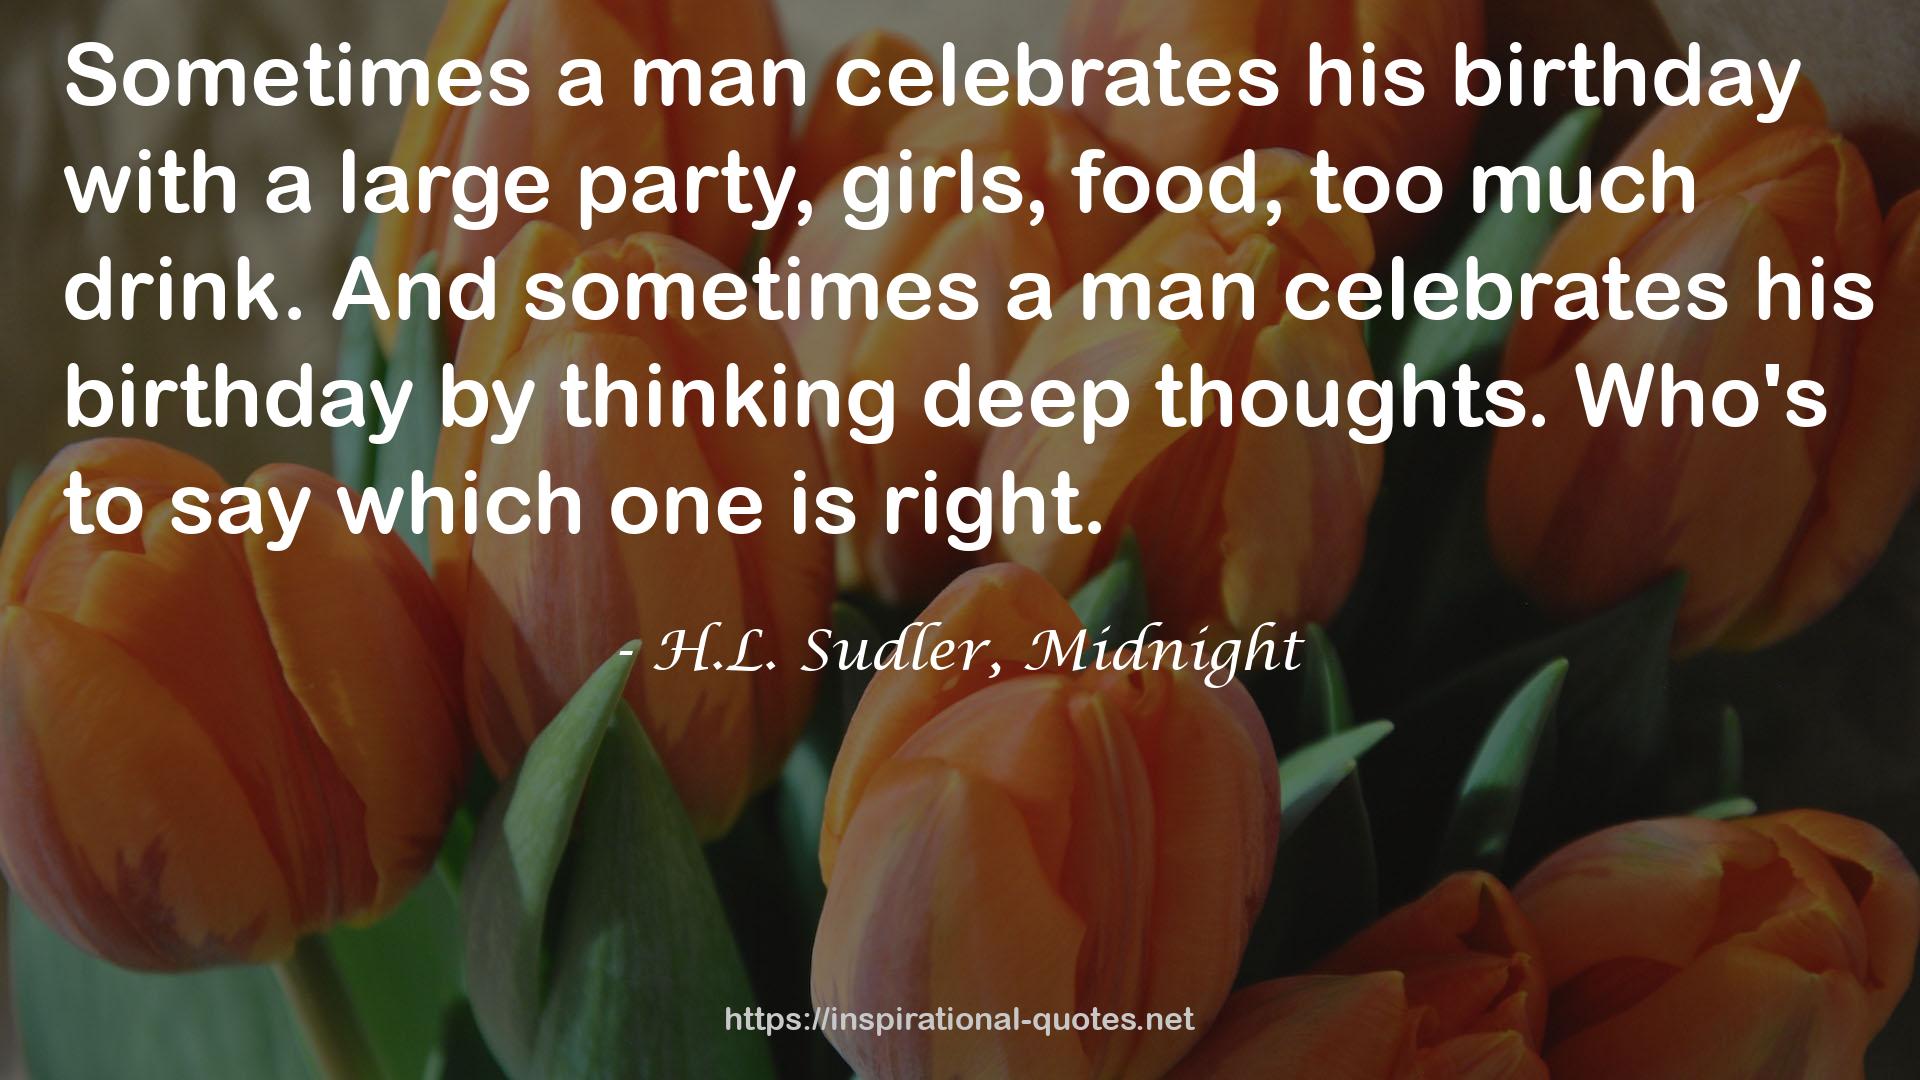 H.L. Sudler, Midnight QUOTES